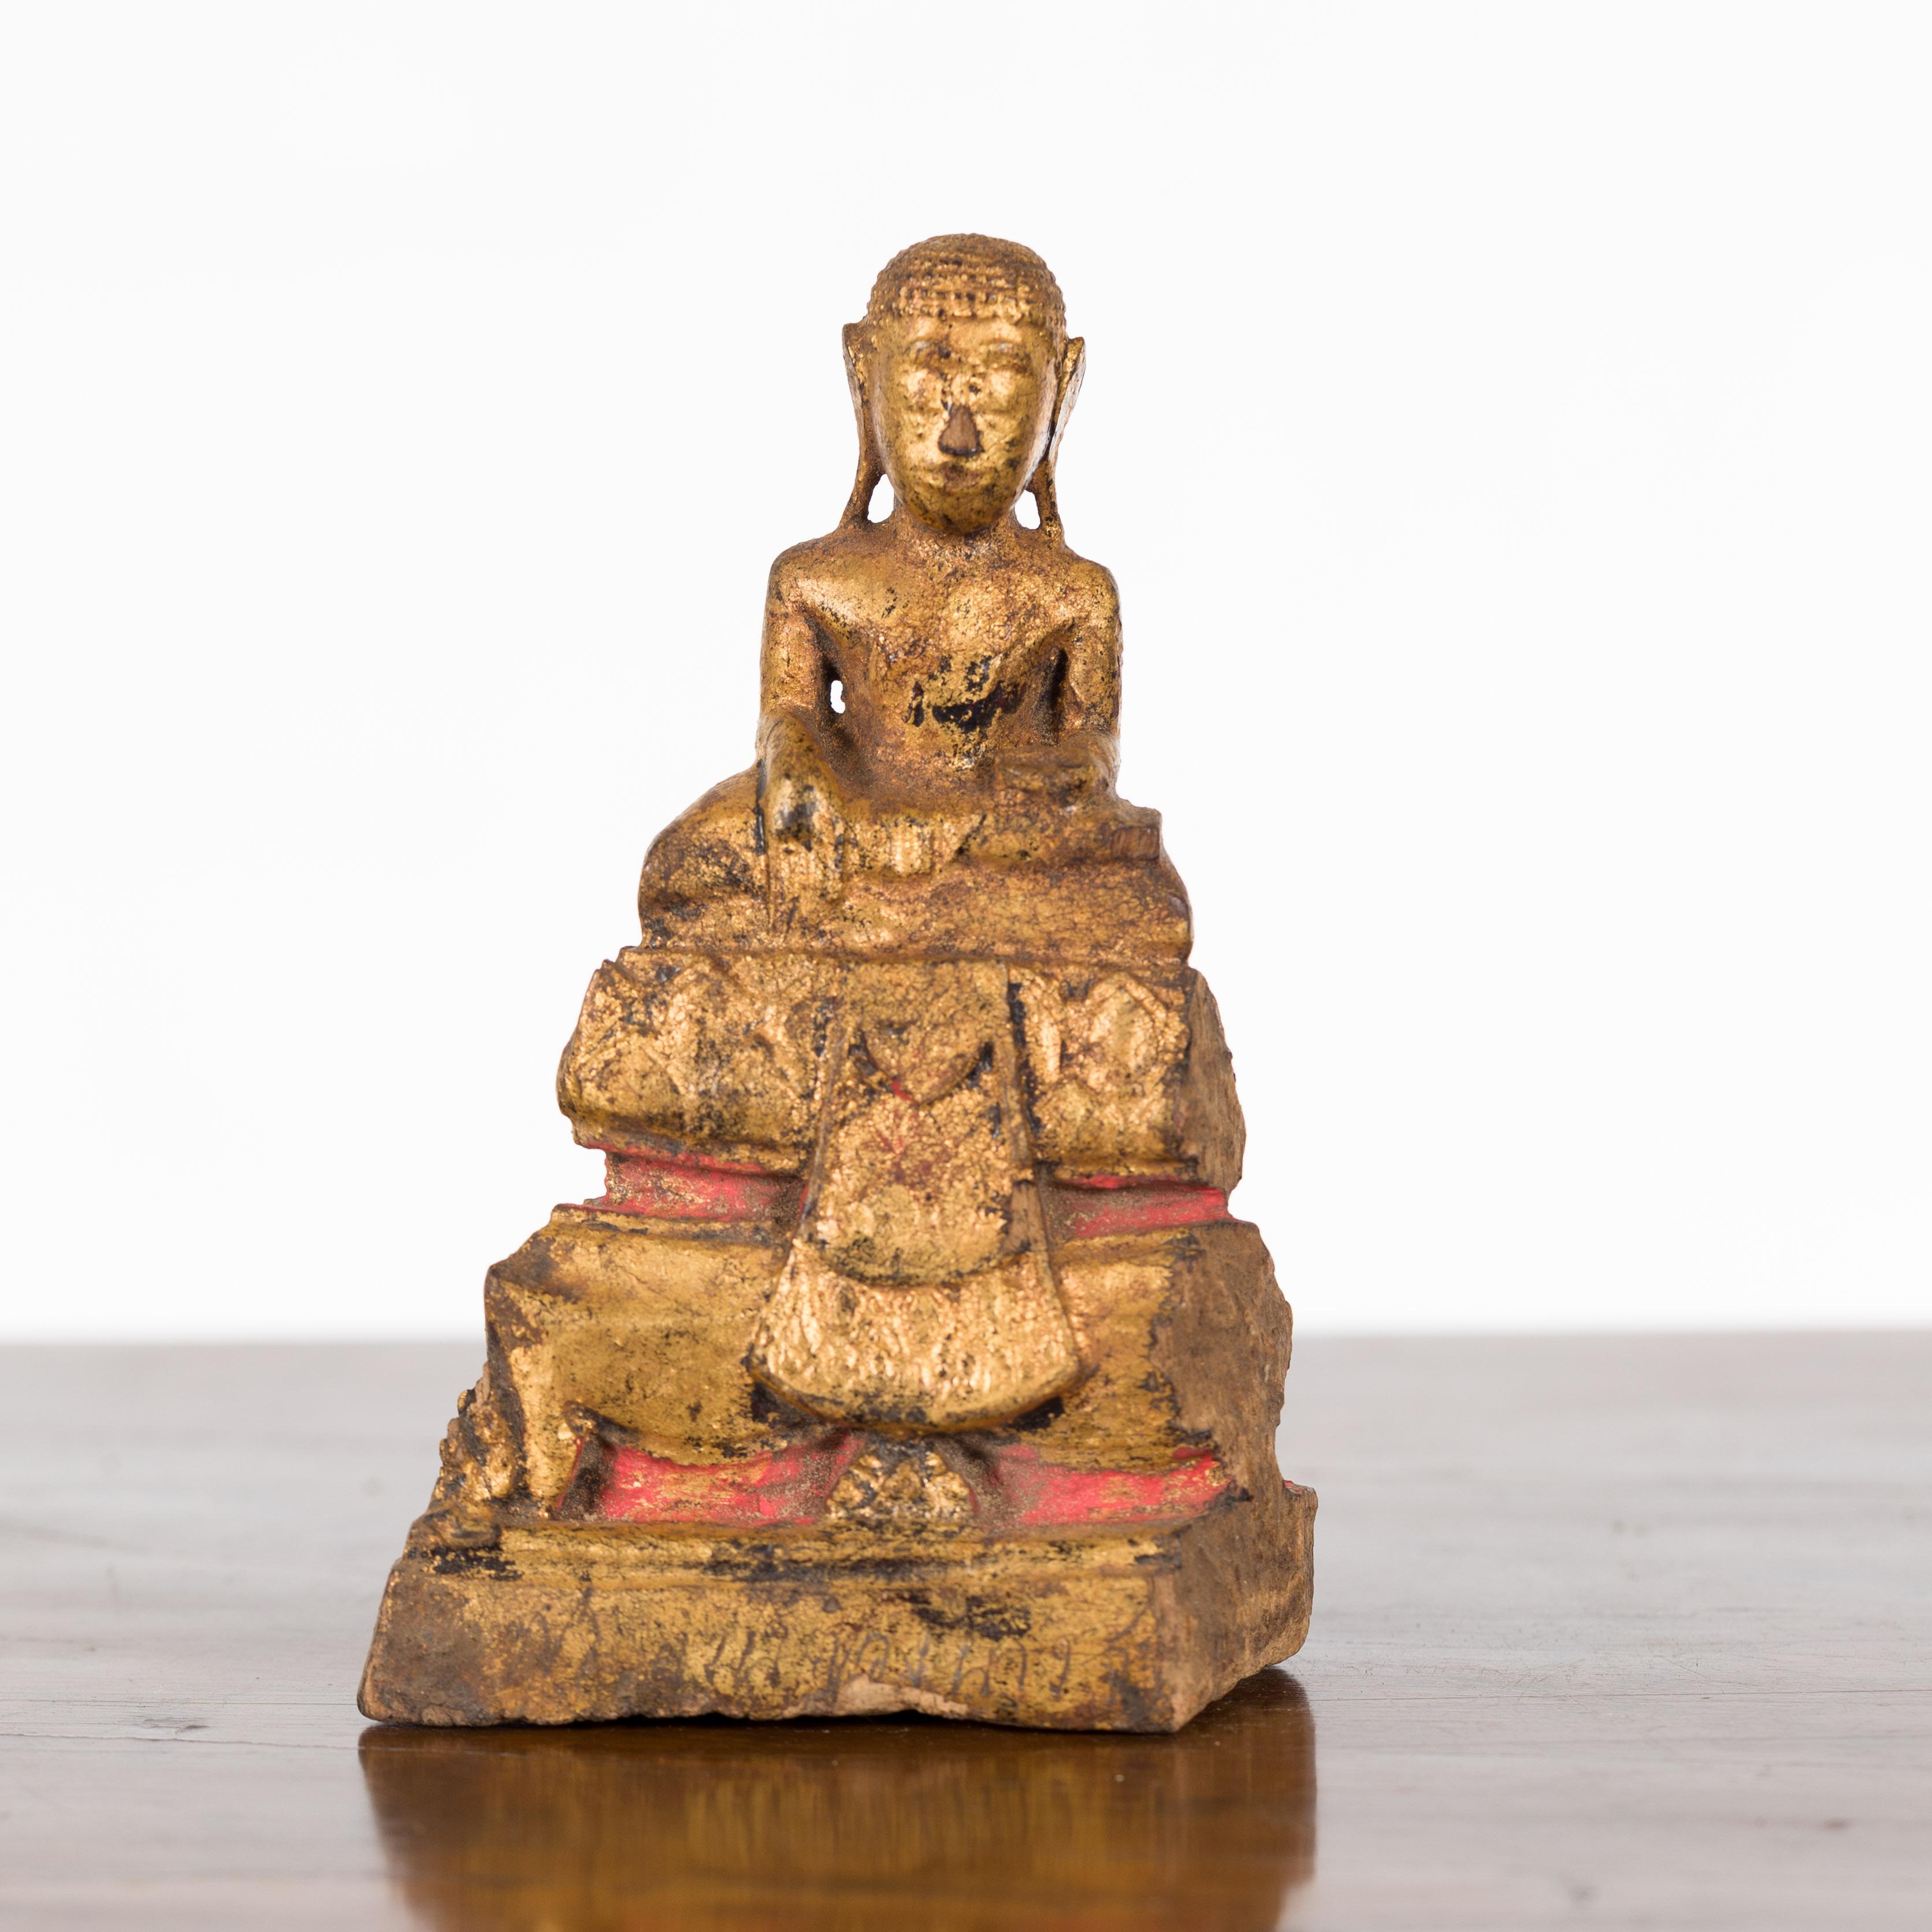 A petite antique Thai giltwood Buddha sculpture from the Ayutthaya period, with the Bhumisparsha Mudra, Calling the Earth to Witness. Created in Thailand during the late Ayutthaya period, this small giltwood sculpture depicts the Buddha seated in